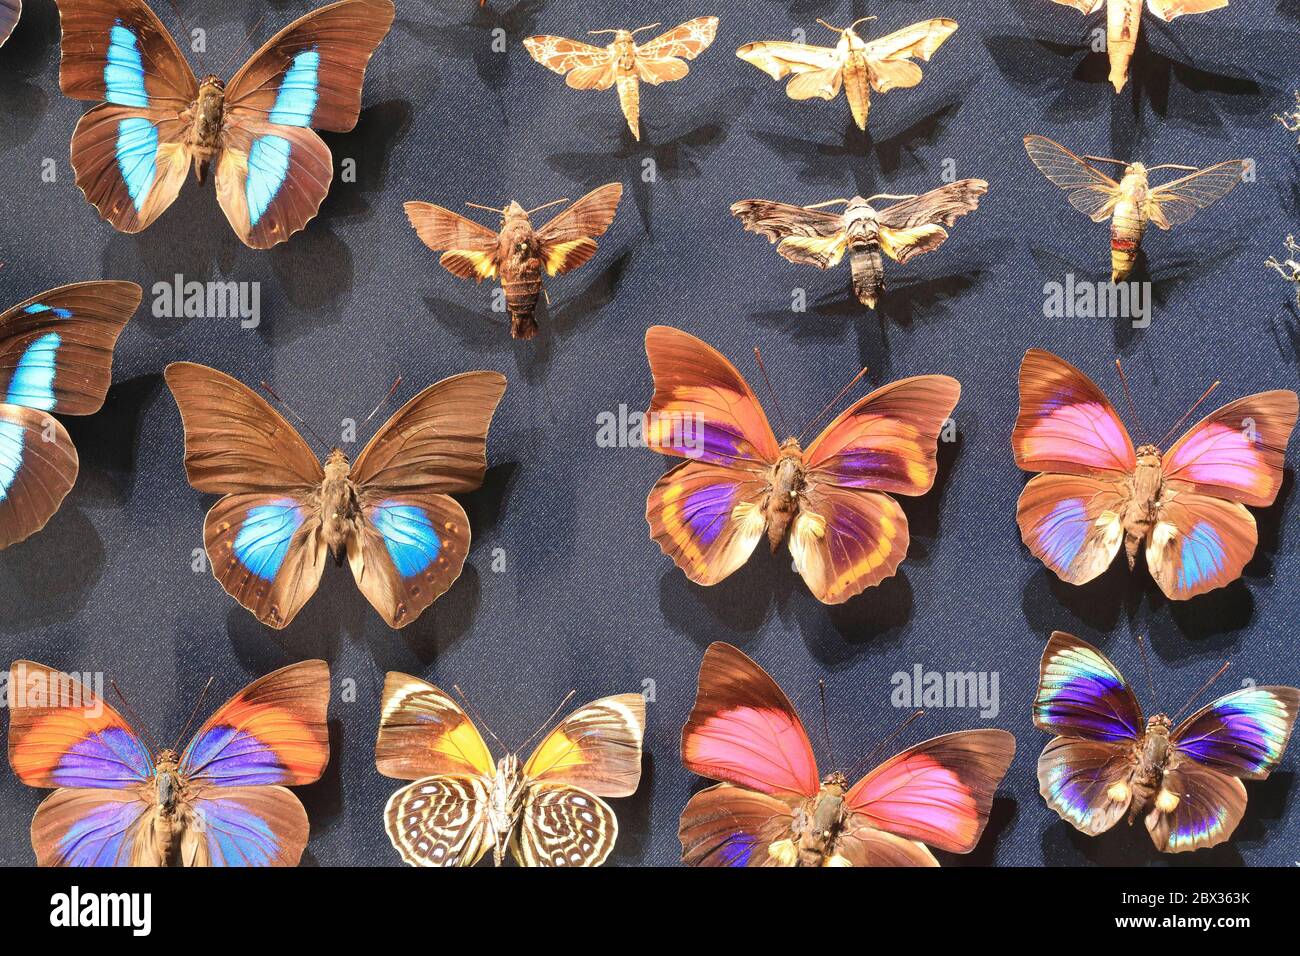 France, Rhone, Lyon, La Confluence district, Musée des Confluences is a museum of natural history, anthropology, societies and civilizations, exhibition of butterflies Stock Photo